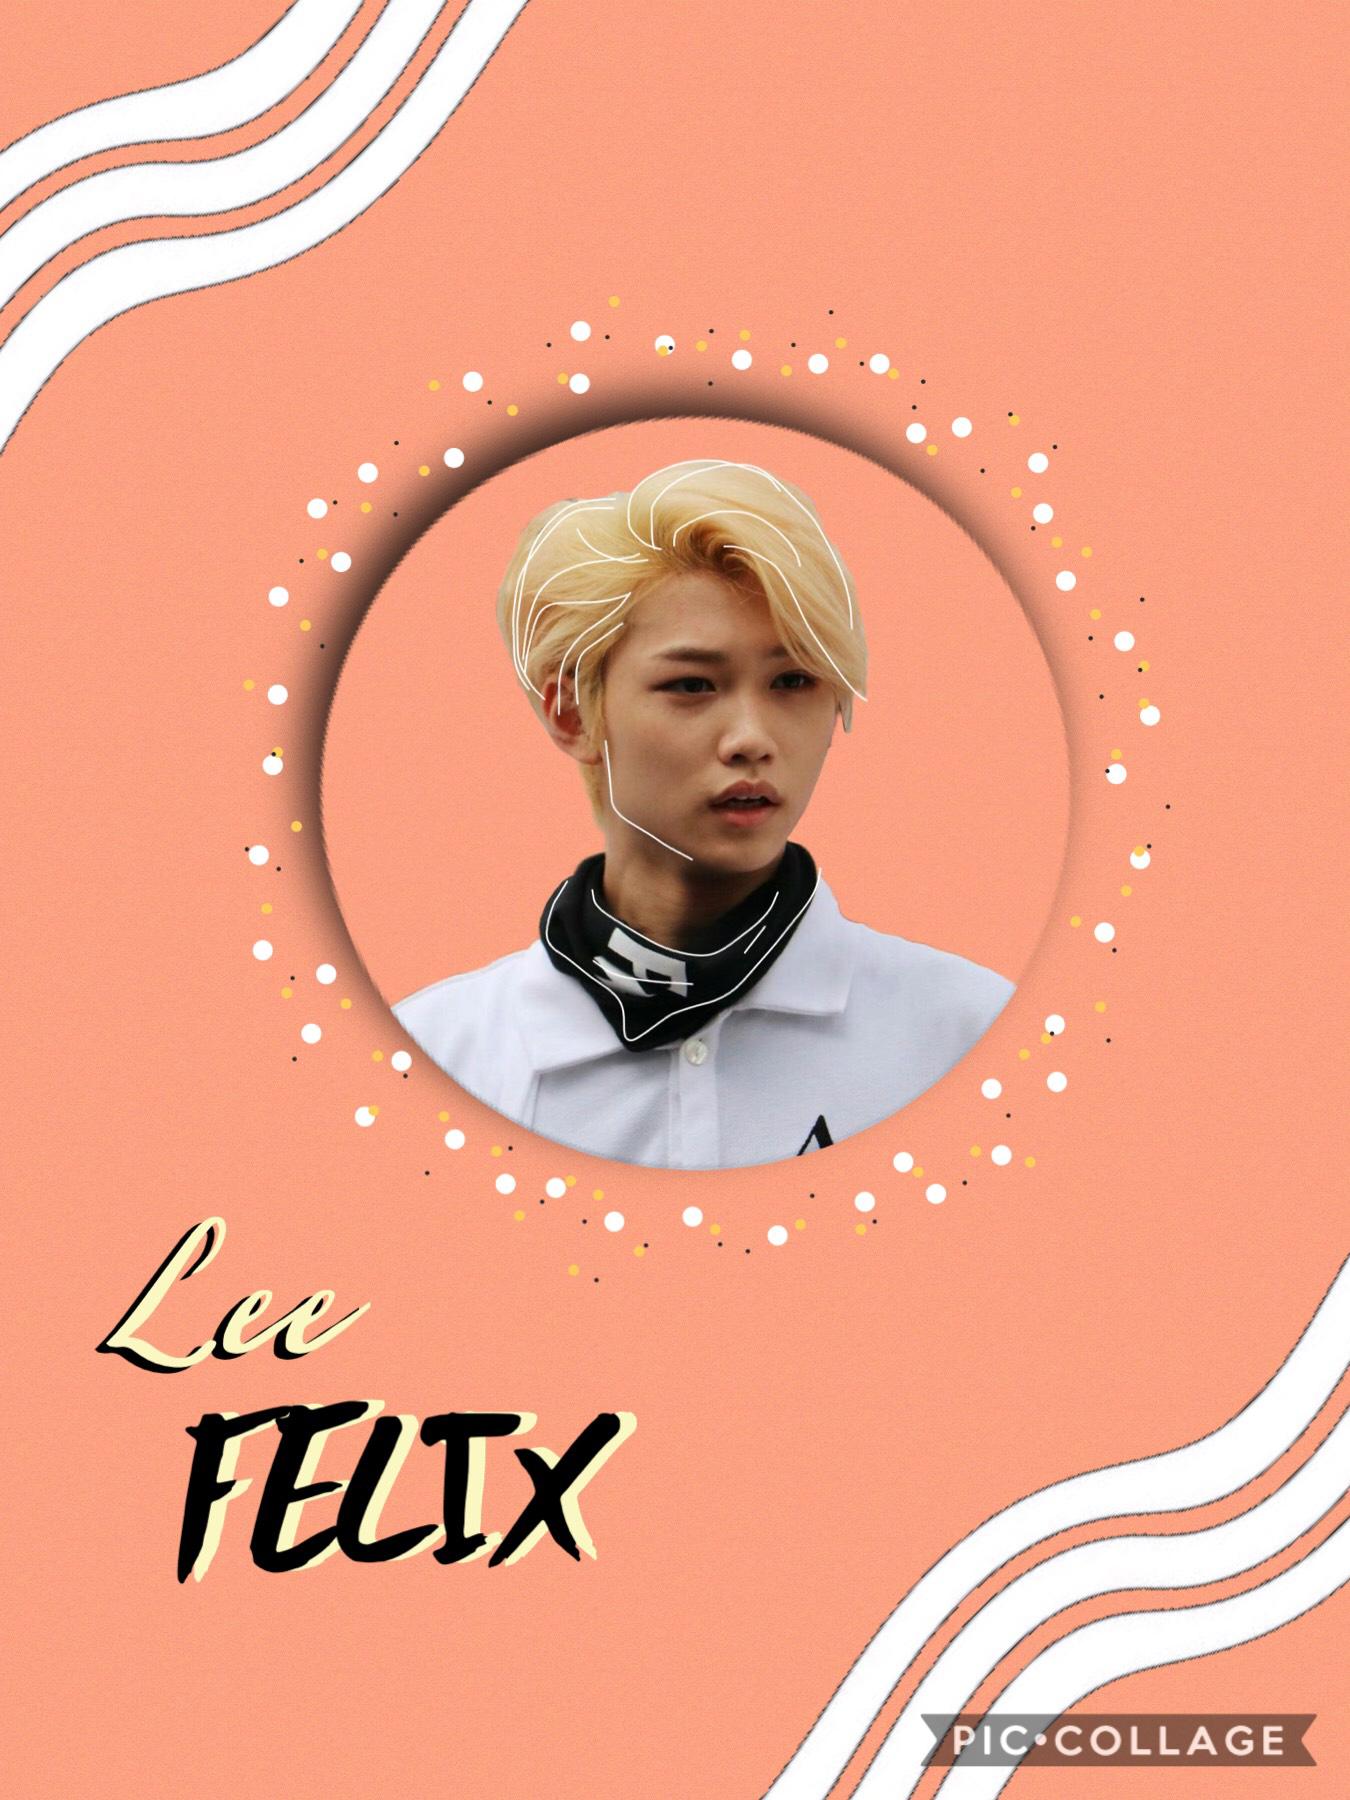 - 🥭 -

Ok Mangos or Fla🥭? (LOL Get it?) 

FELIX! My first bias~

This is... very vERY simple... maybe too simple? Idk haha